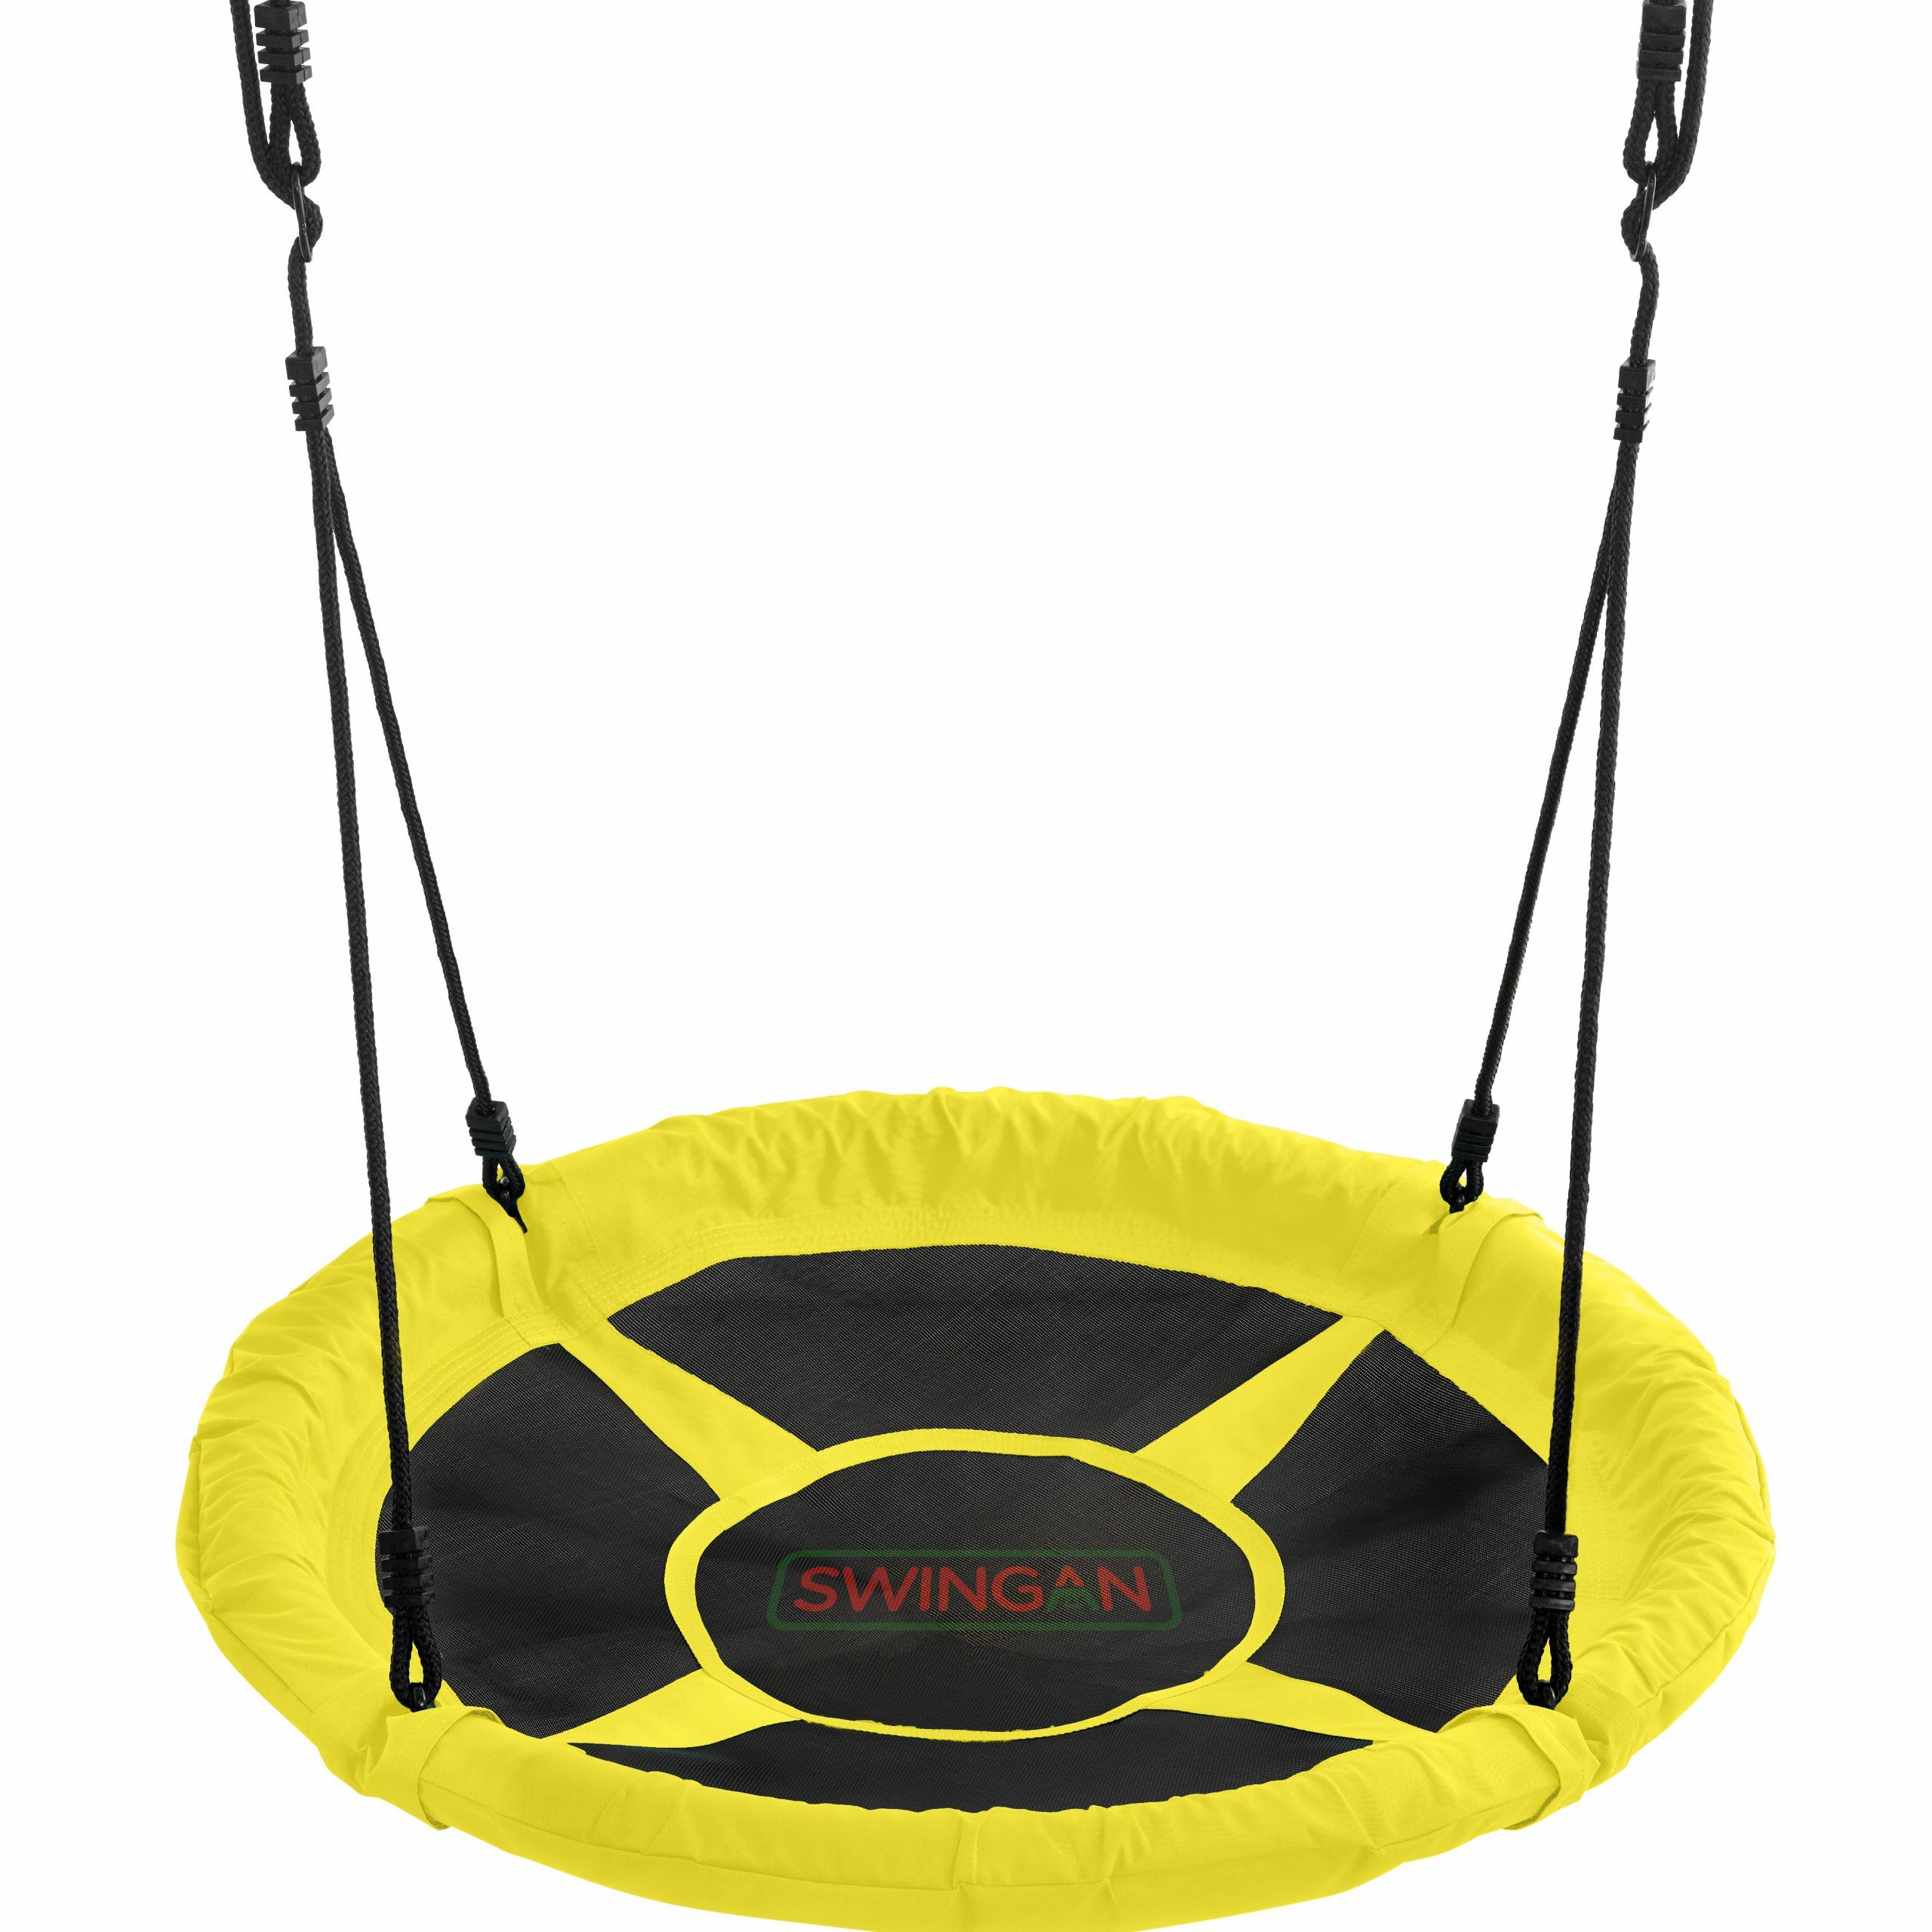 Swingan – 37.5 Super Fun Nest Swing With Adjustable Ropes – Solid Fabric  Seat Design – Yellow Within Nest Swings With Adjustable Ropes (Photo 8 of 25)